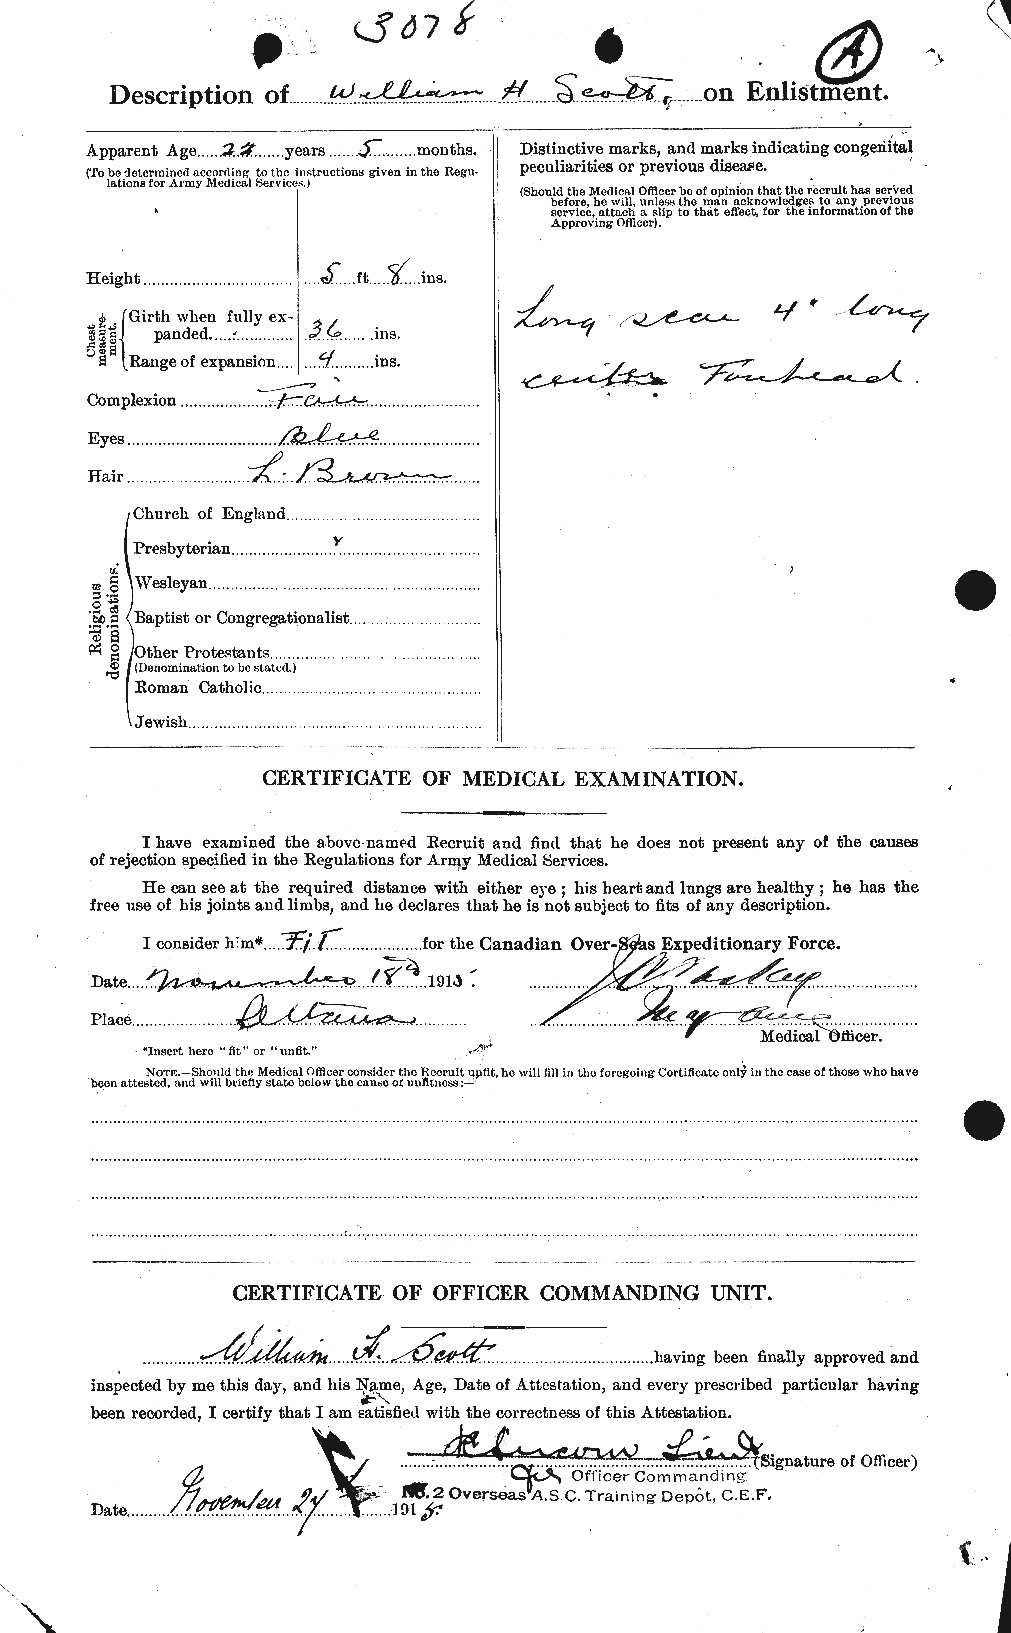 Personnel Records of the First World War - CEF 086999b